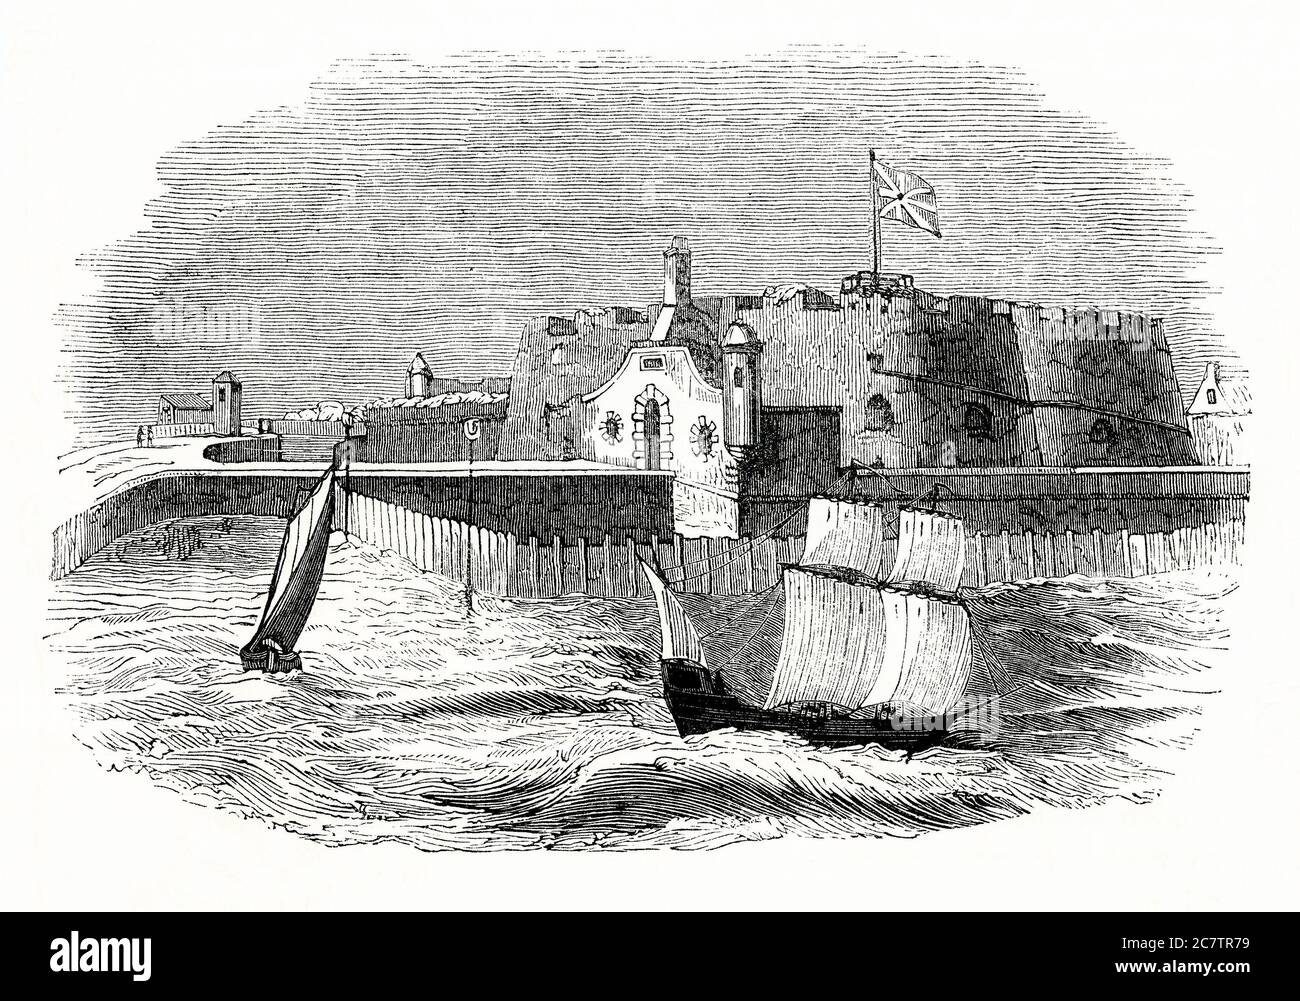 An old engraving showing Hull Castle, an artillery fort in Kingston upon Hull, East Yorkshire, England, UK in the mid-1600s. Together with two supporting blockhouses, it defended the eastern side of the River Hull, and was constructed by King Henry VIII to protect against attack from France. The castle had two large, curved bastions and a rectangular keep at its centre with blockhouses to the north and south. A curtain wall and moat linked the blockhouses and castle. Stock Photo